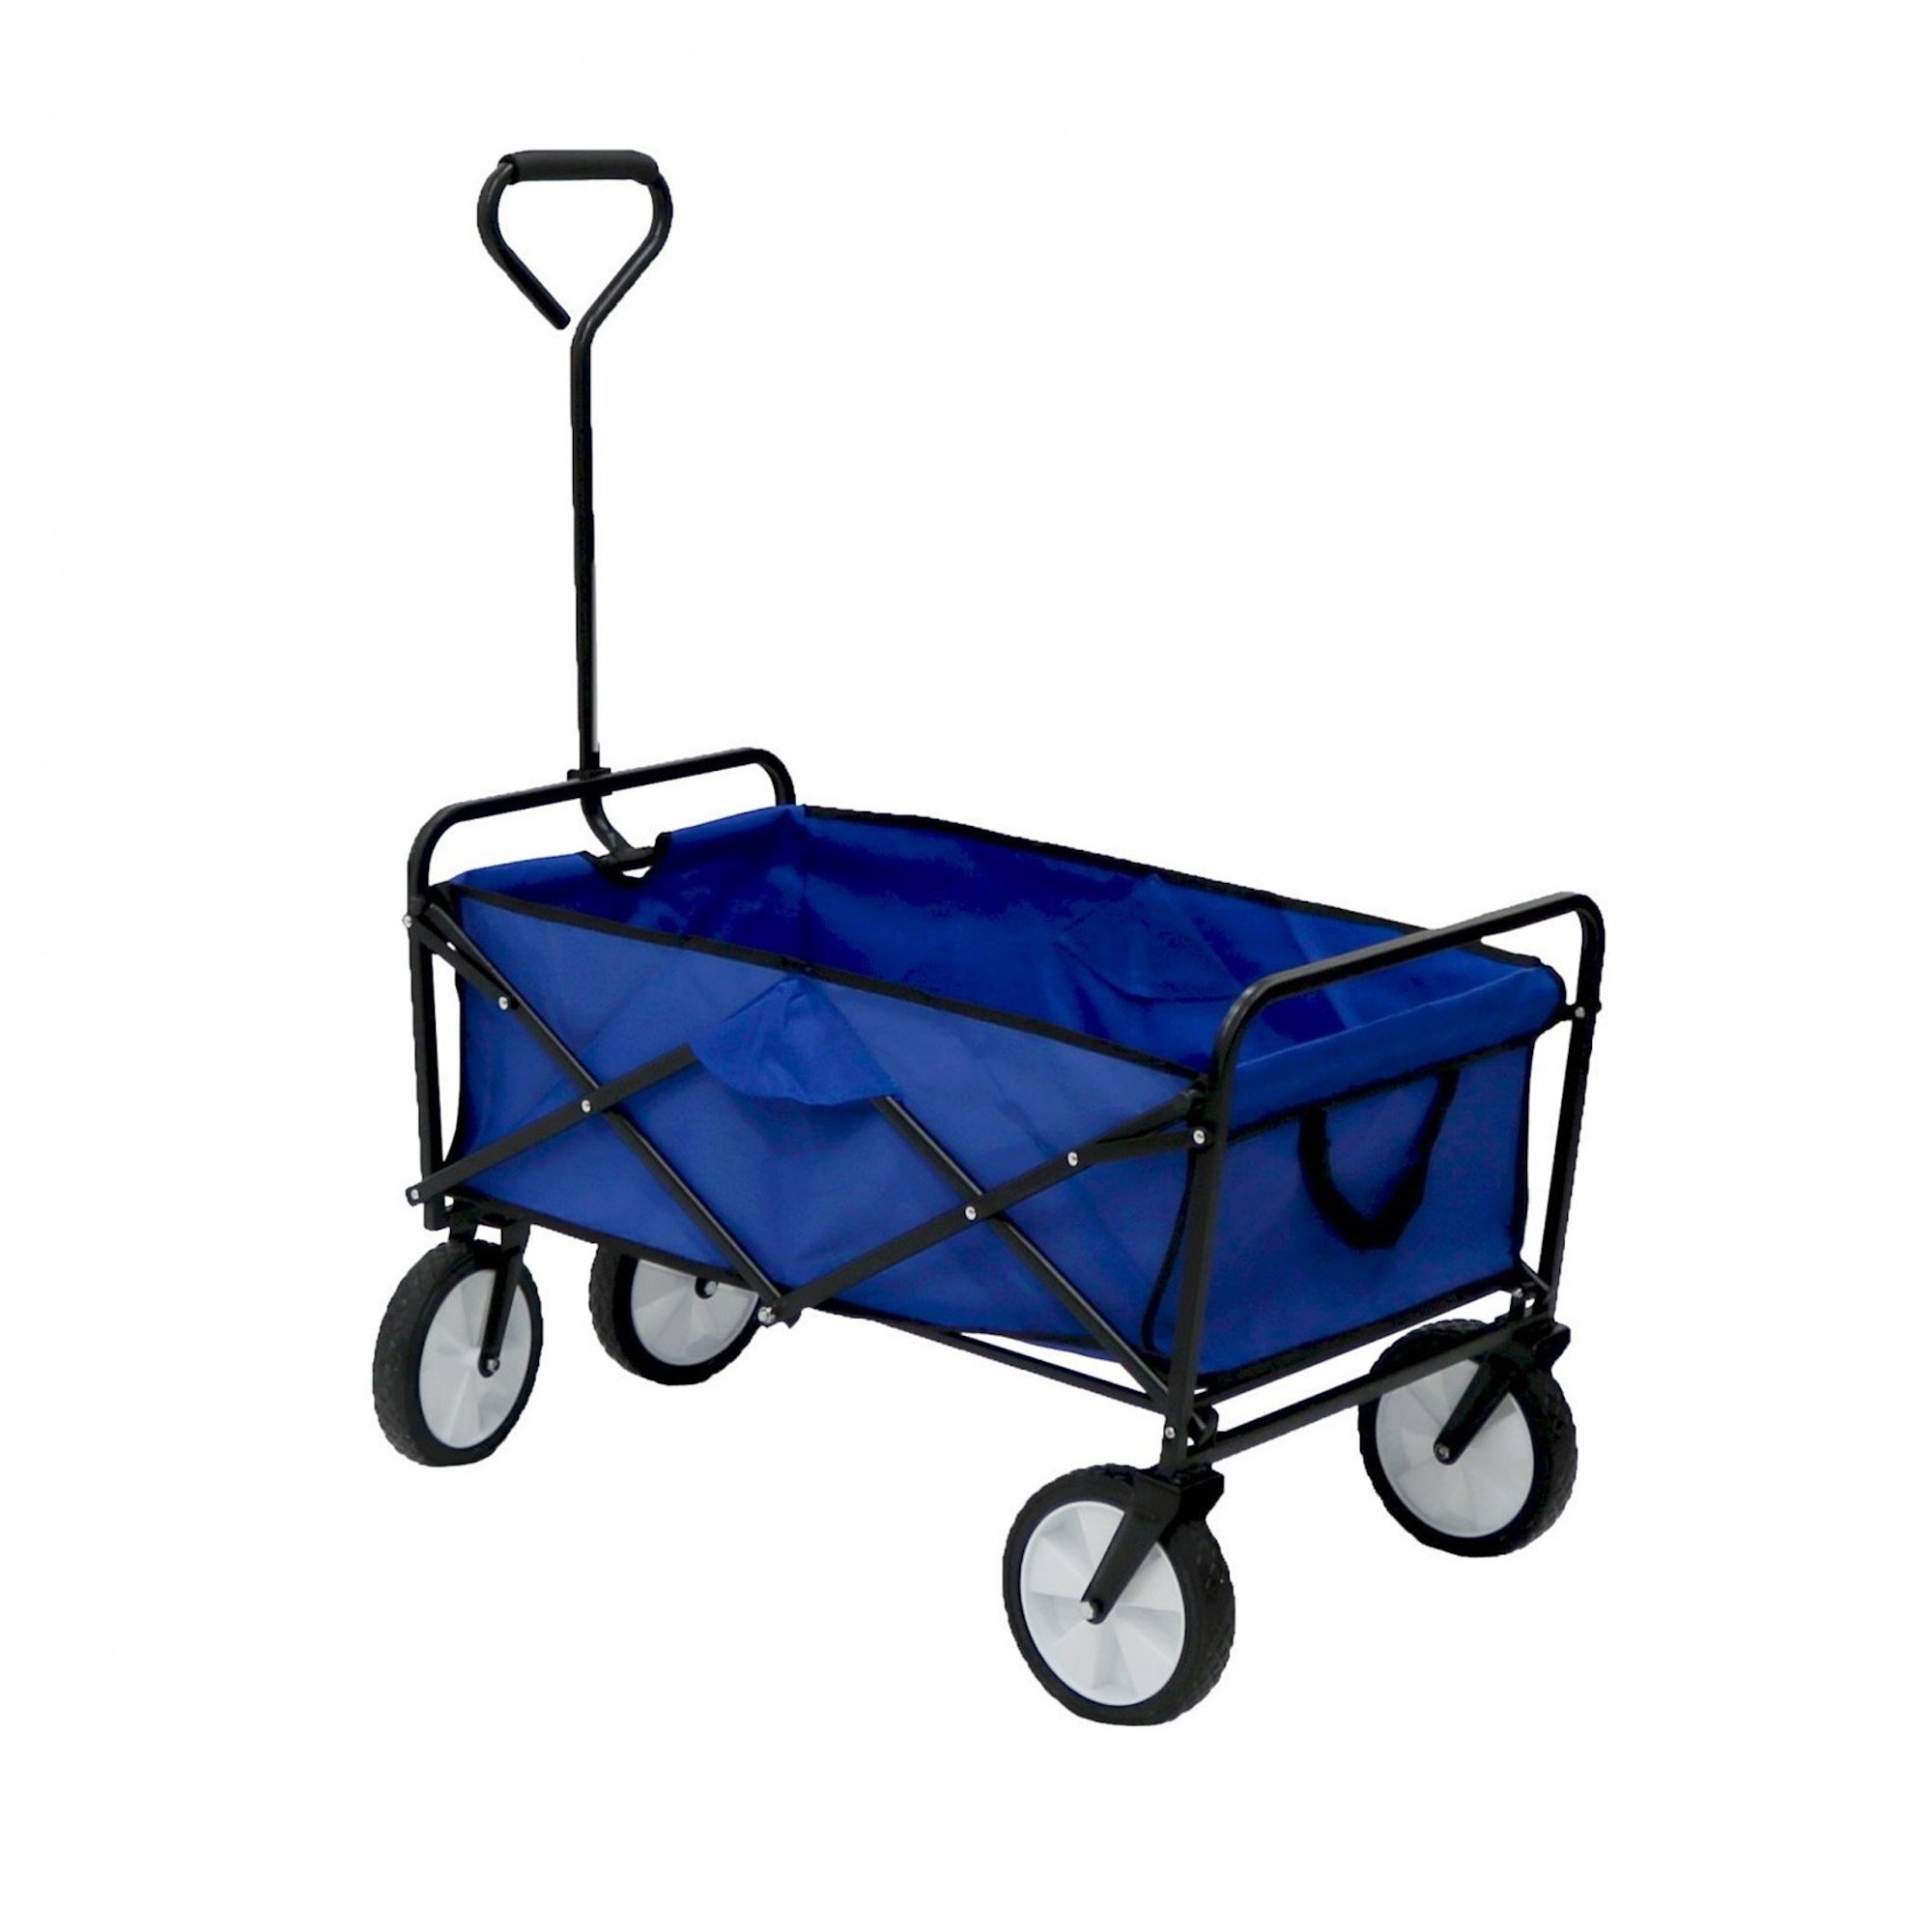 Blue Heavy Duty Foldable Garden Trolley Cart Wagon Truck - Click Image to Close